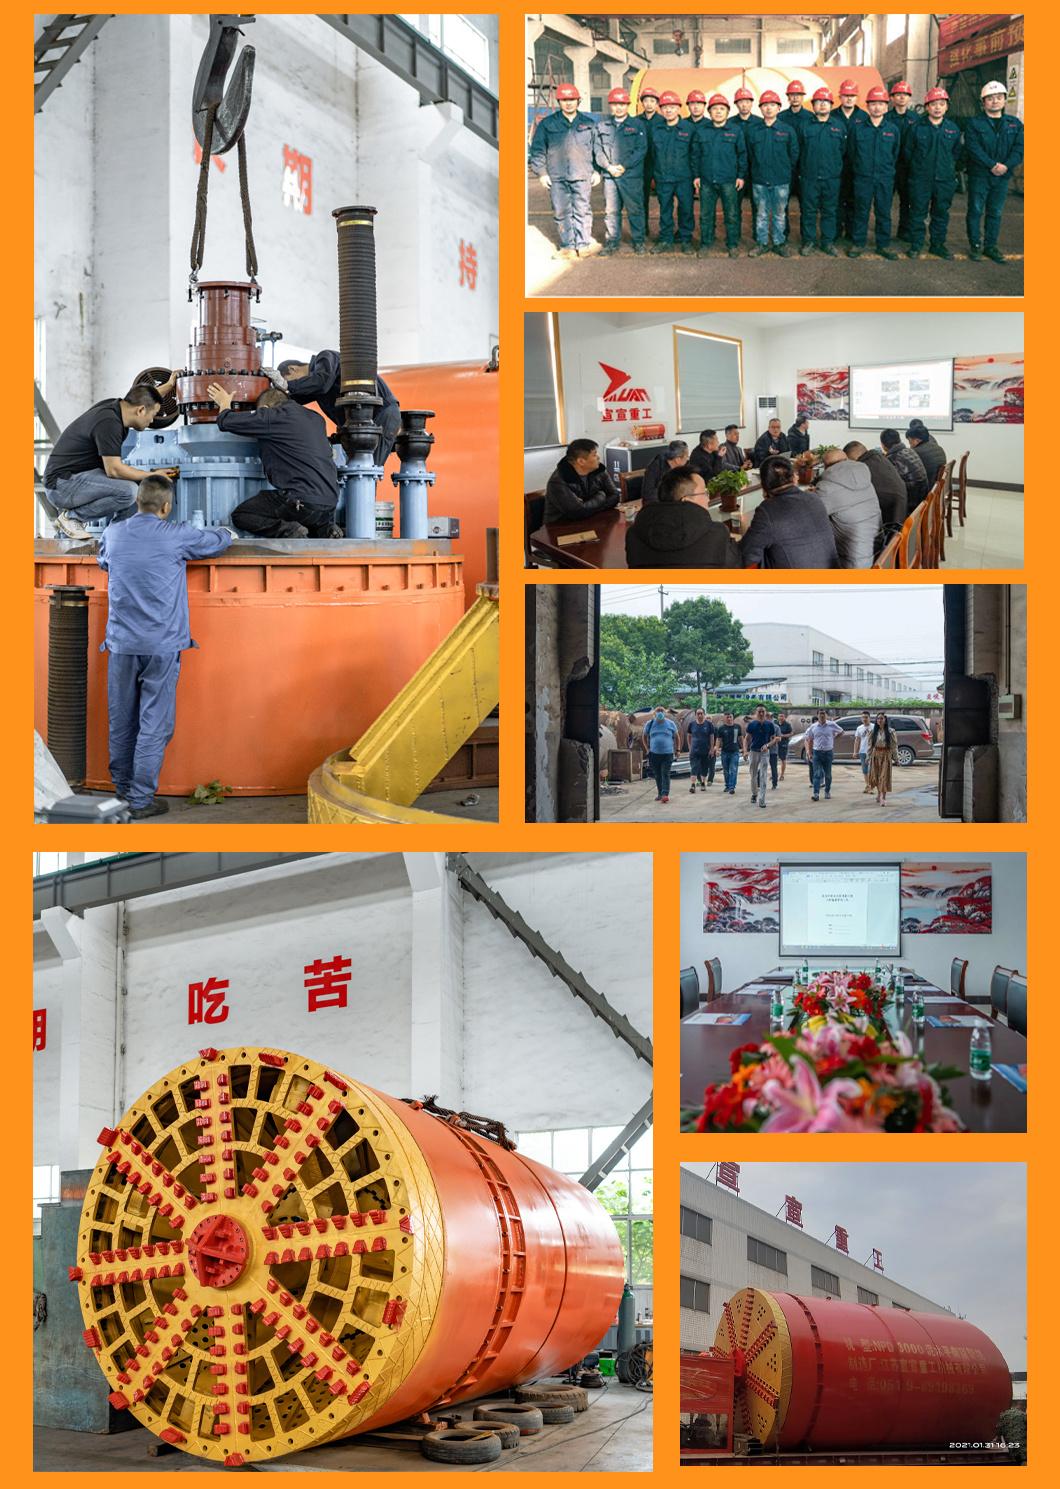 Efficient Hot Sale Trenchless Project Ysd3000/2400 Rock Pipe Jacking Machine for Rcc